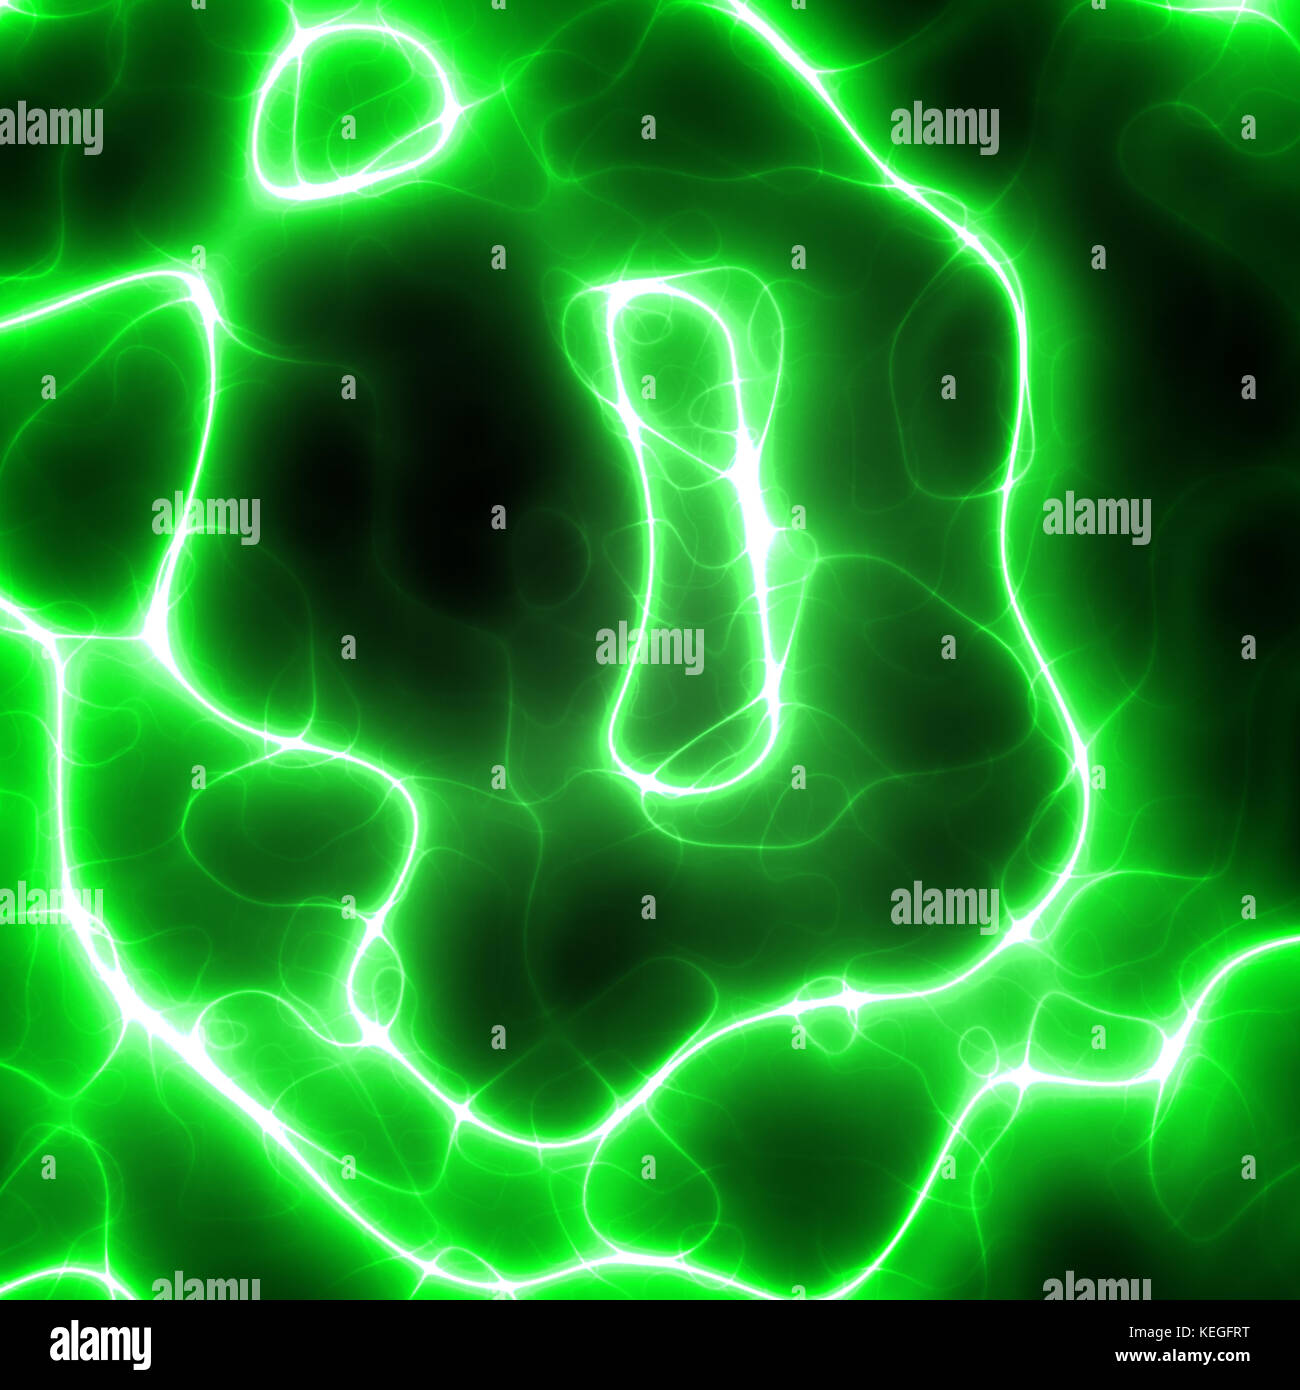 Green electromagnetic field rendering for background Stock Photo